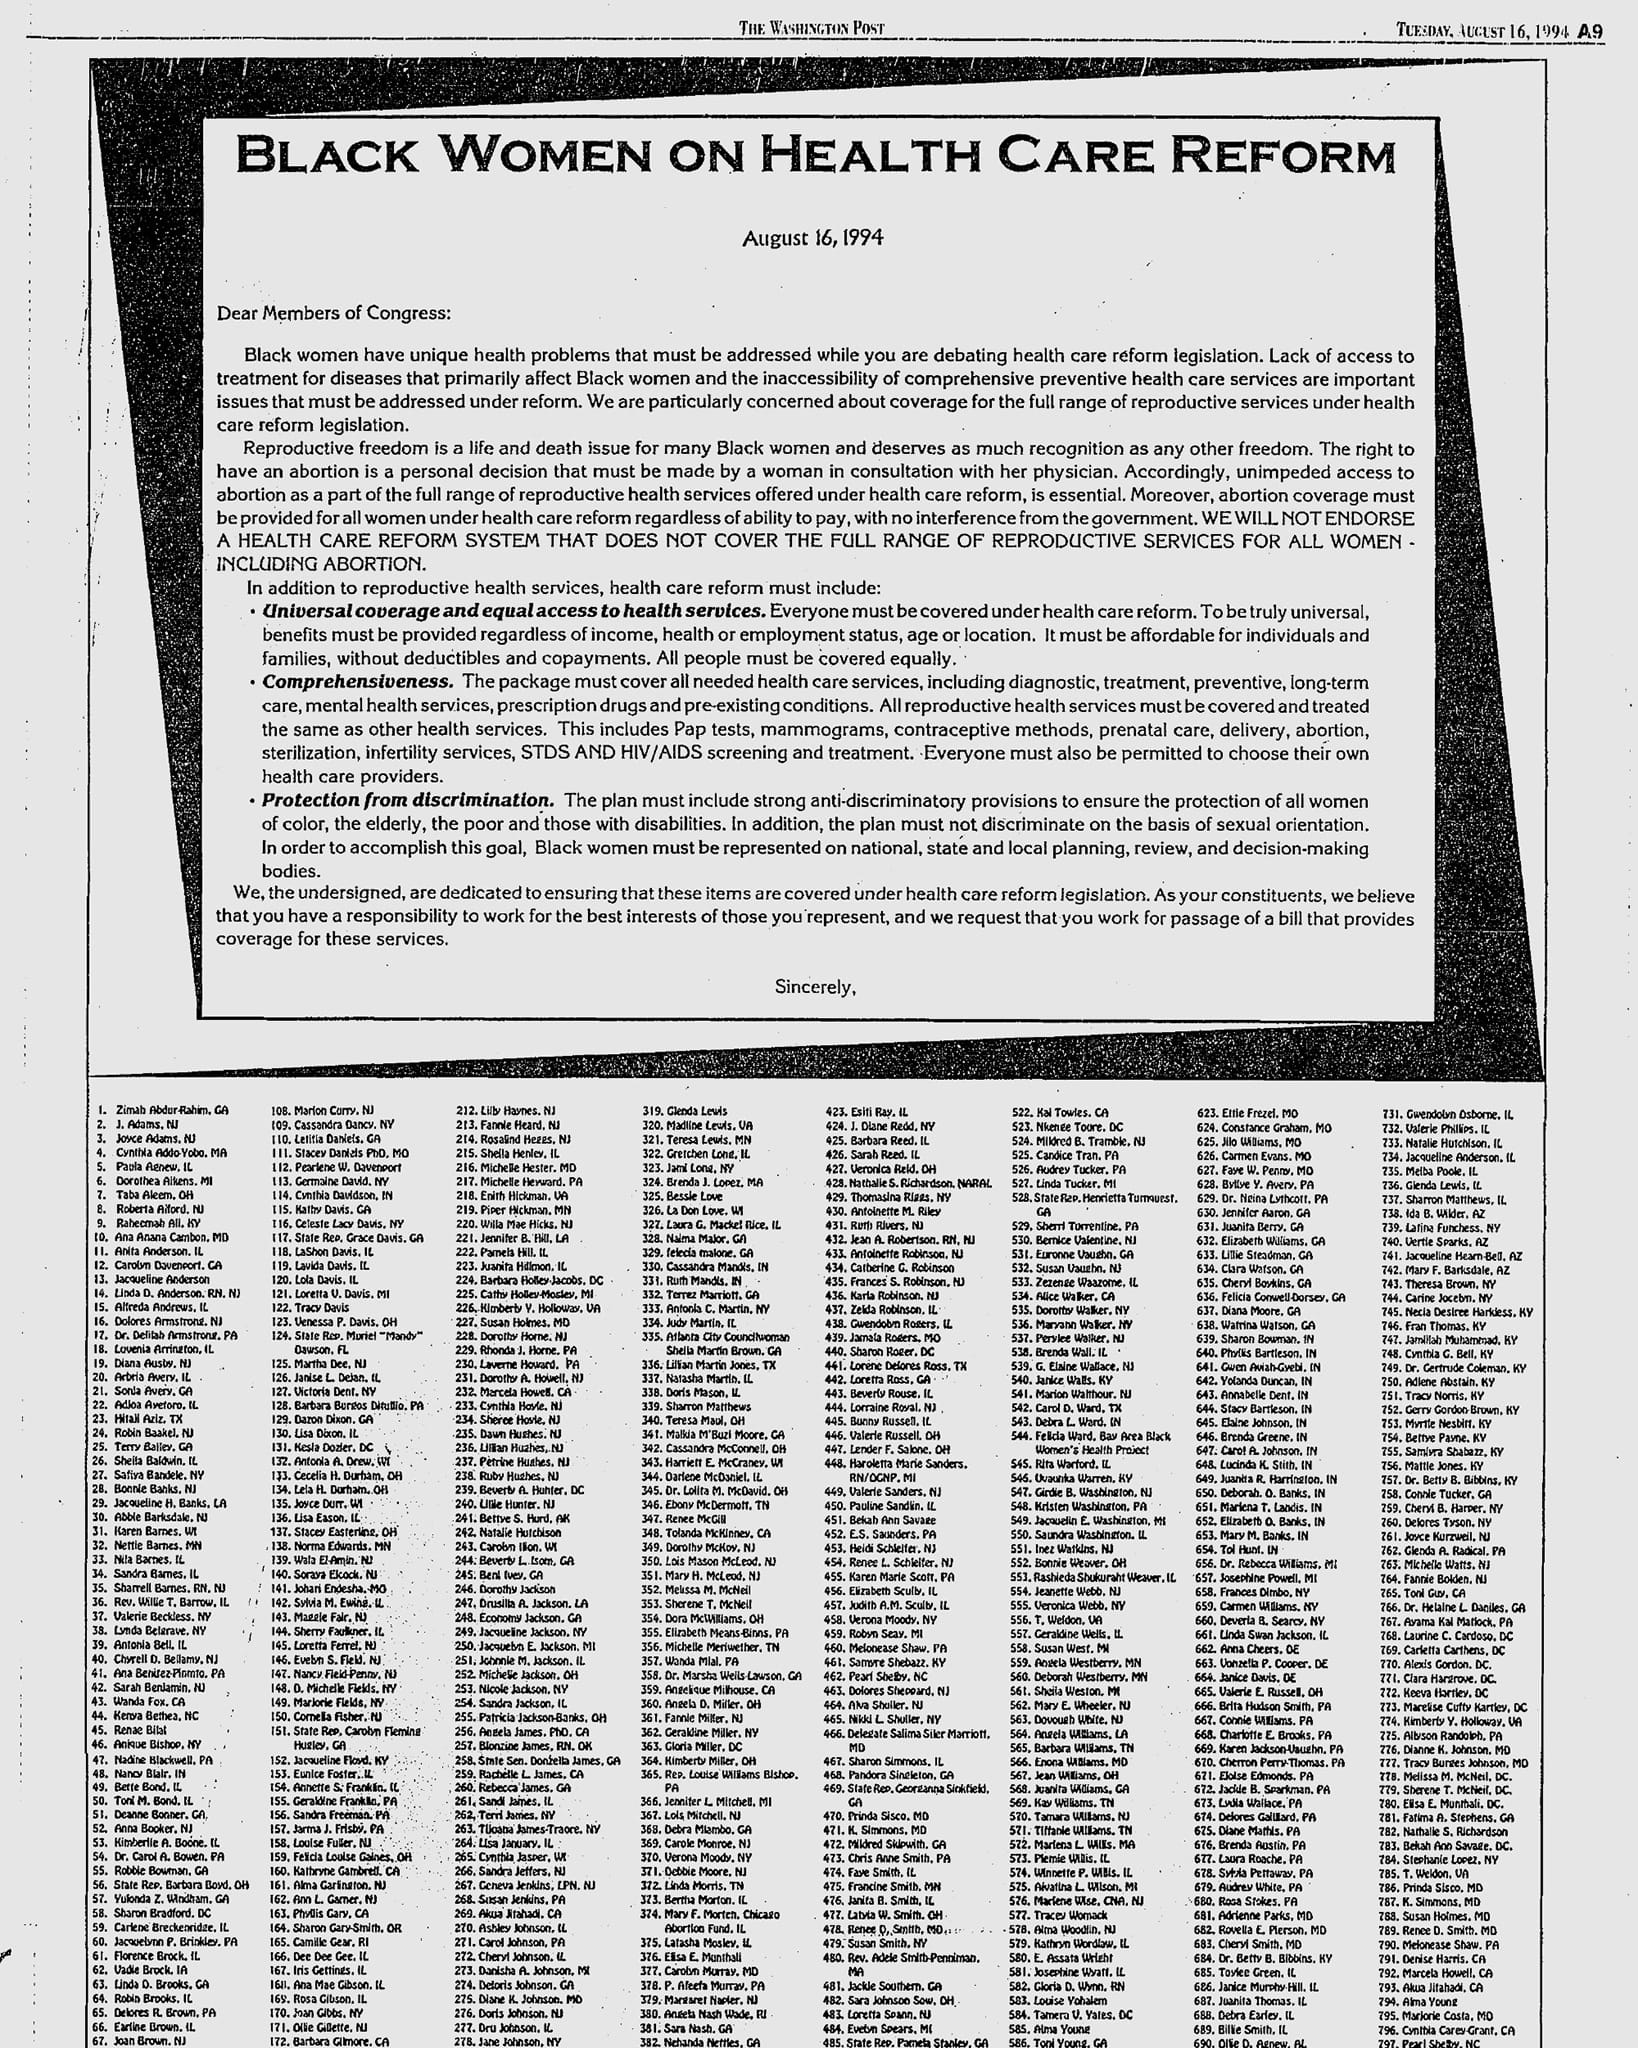 A newspaper page featuring an open letter, Black Women on Health Care Reform, with eight columns of signee names.